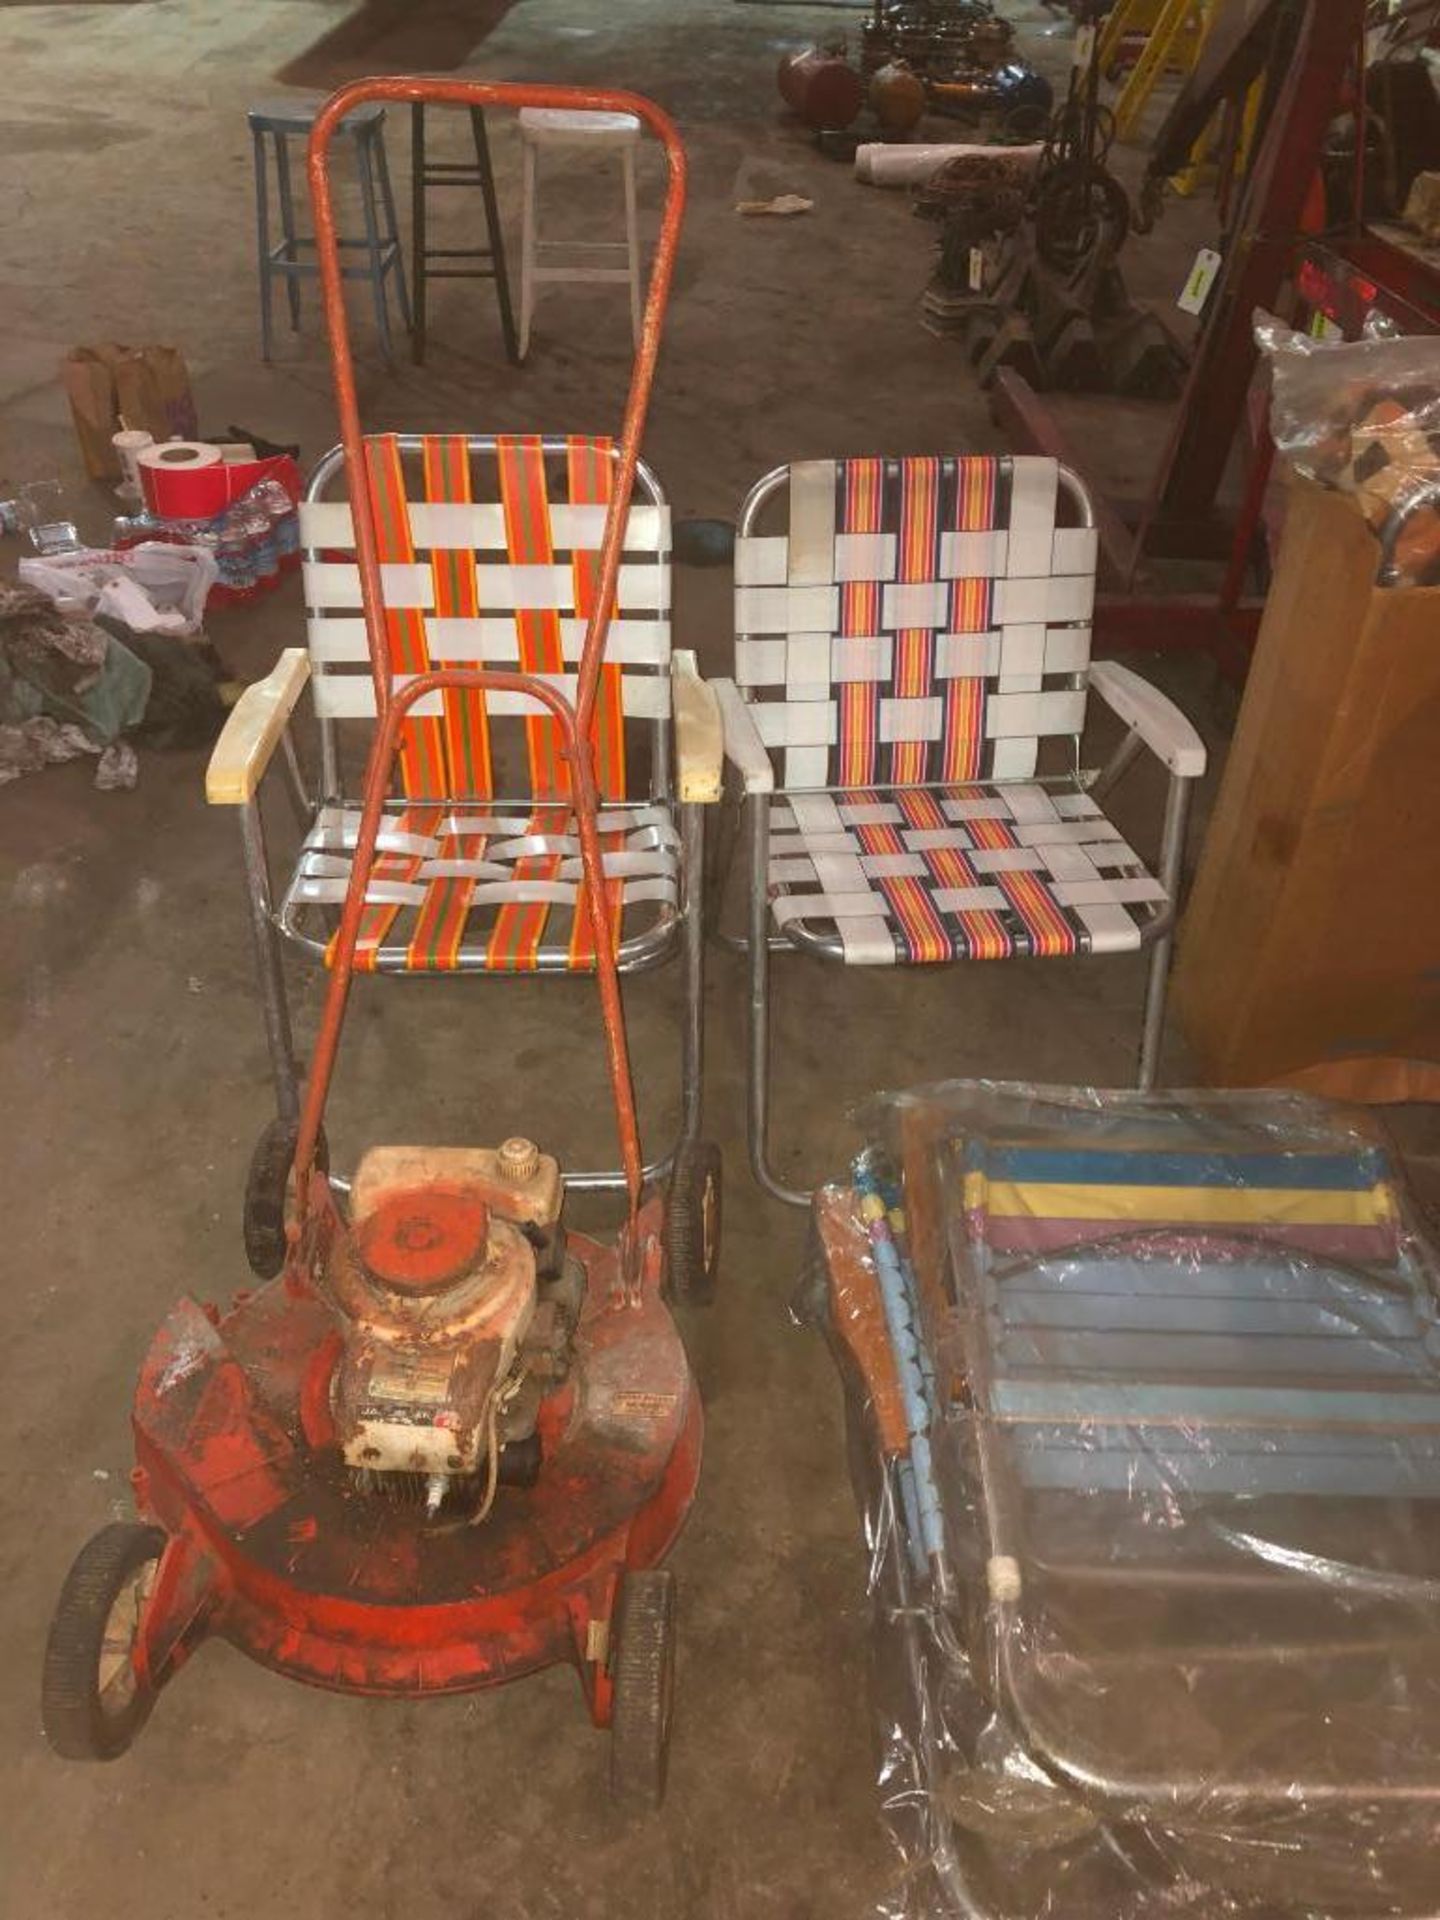 DESCRIPTION ASSORTED OUTDOOR PACKAGE (LAWN MOWER, GRILL, LAWN CHAIRS, ETC.) THIS LOT IS ONE MONEY QU - Image 3 of 5